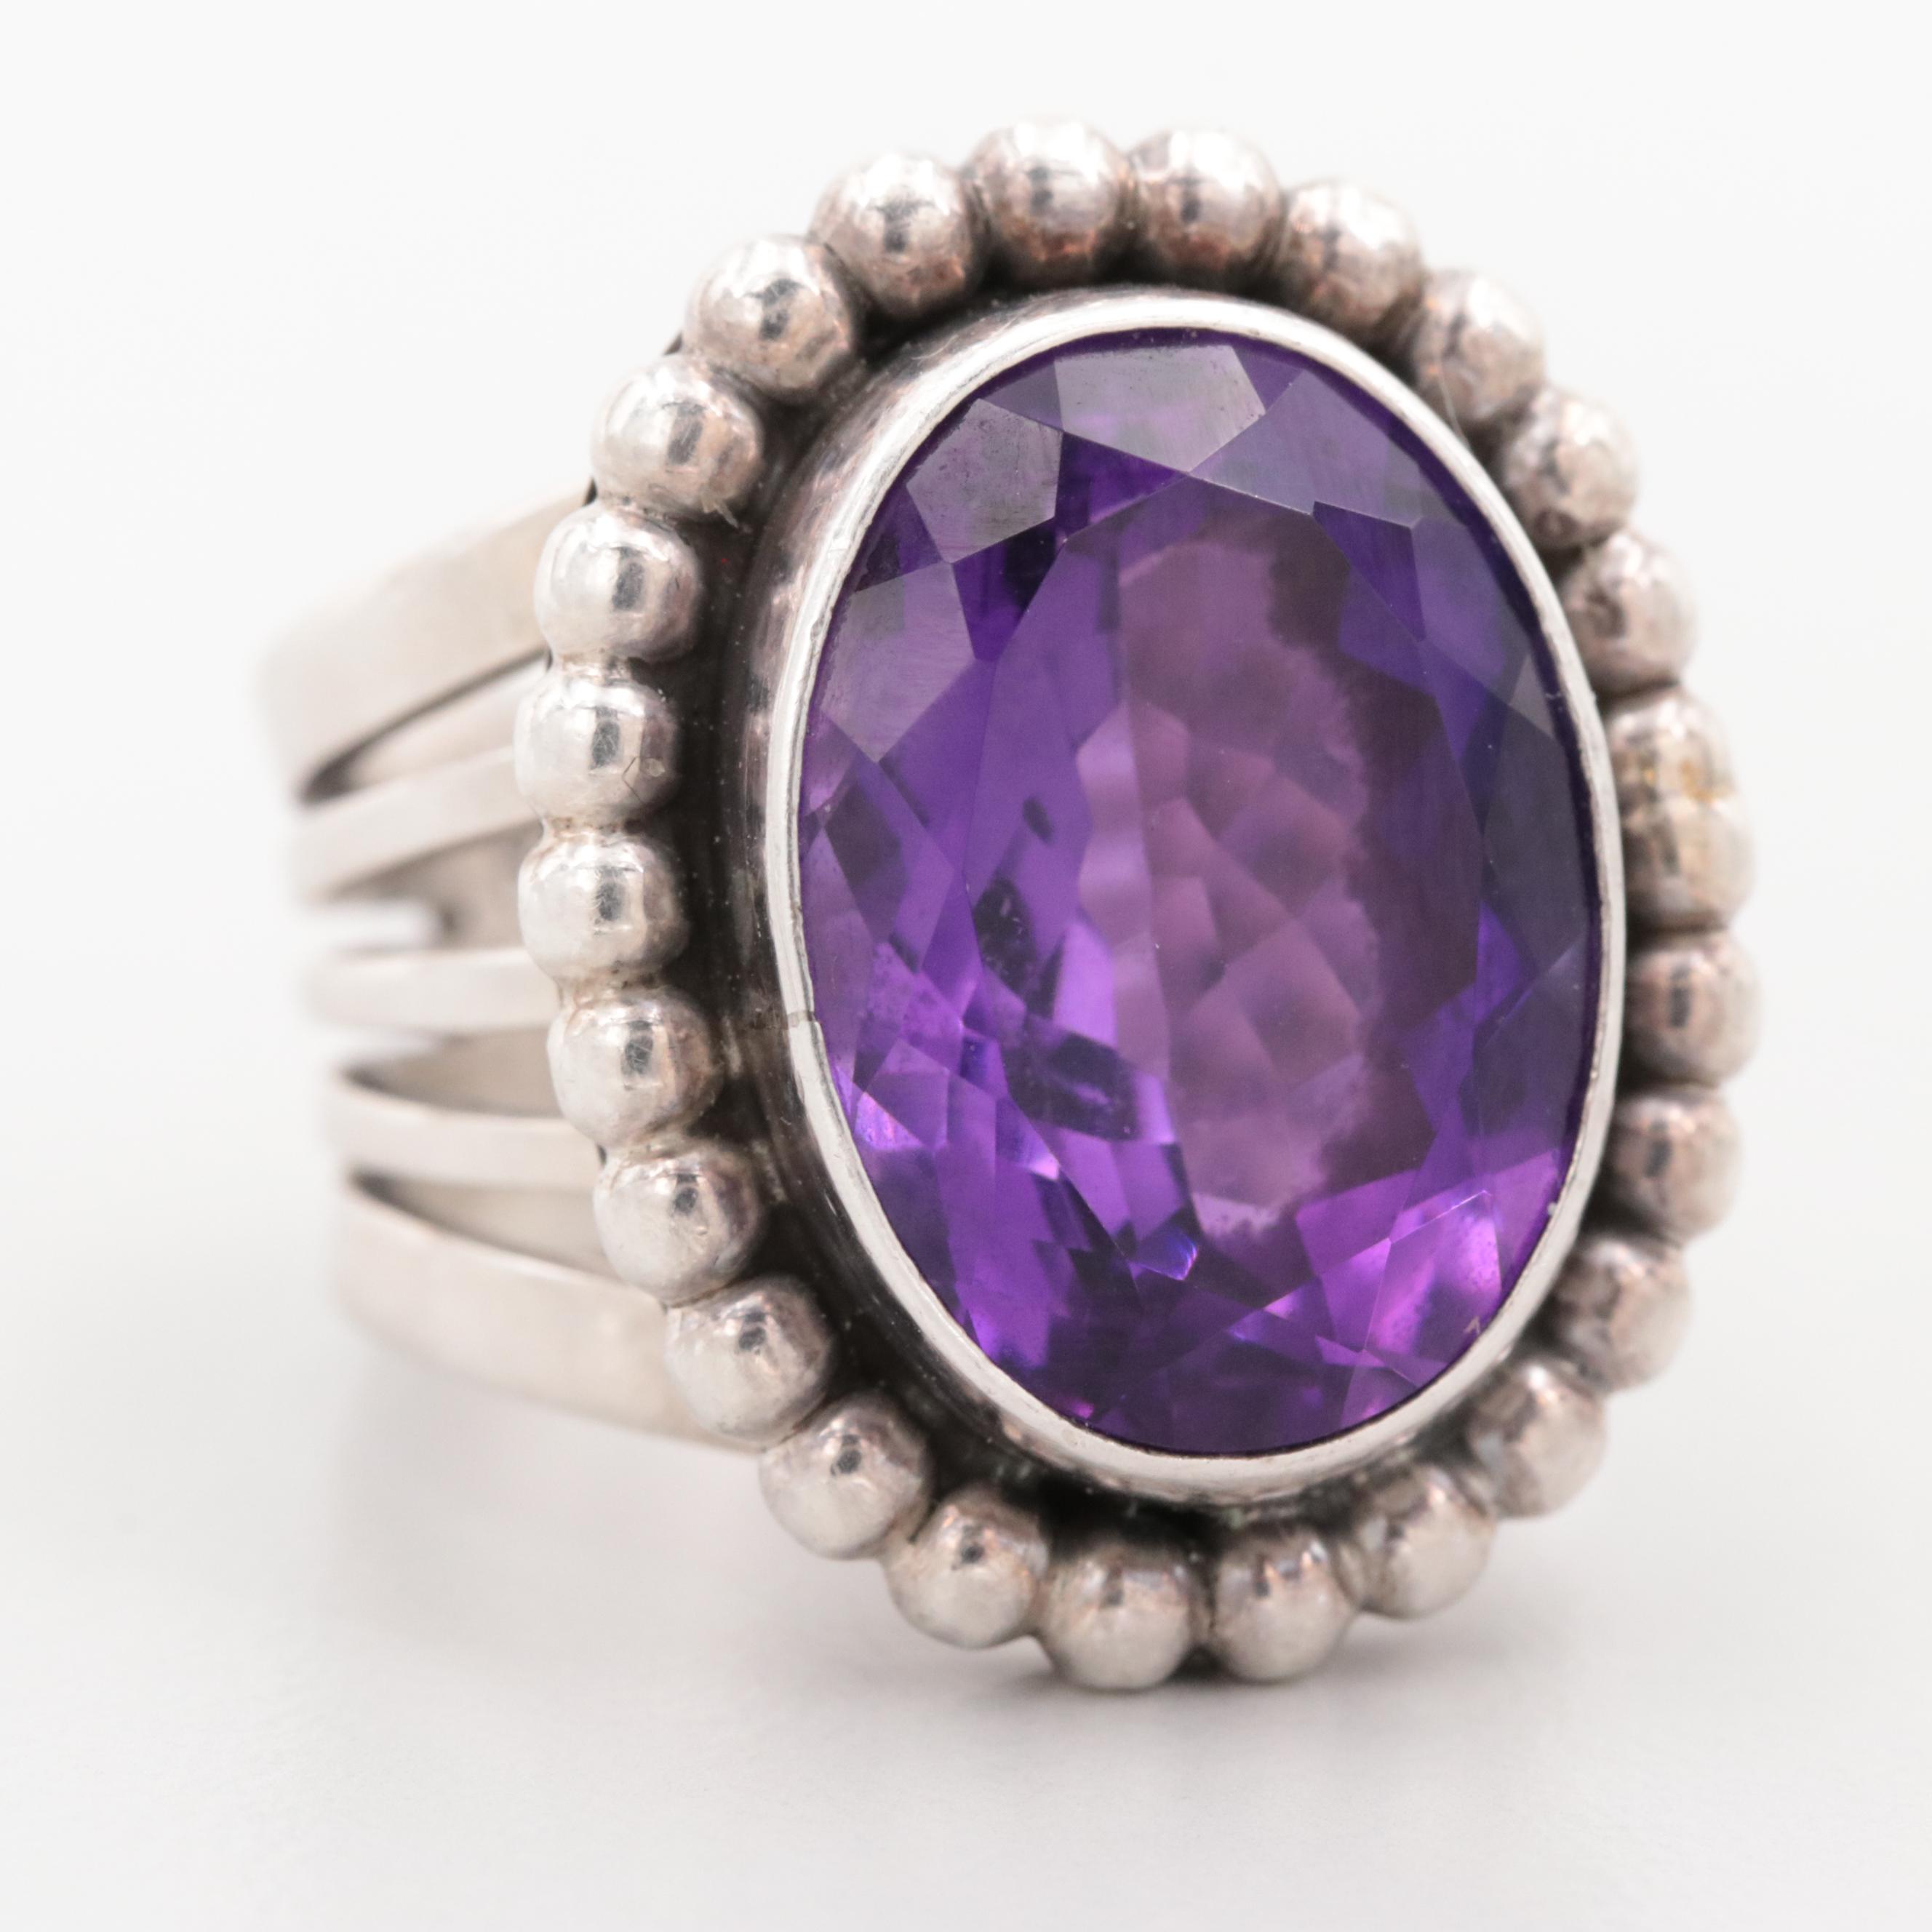 Details about   Russell Sam Navajo Ladies 7 carat Amethyst Ring Sterling Silver size 7.5 New 